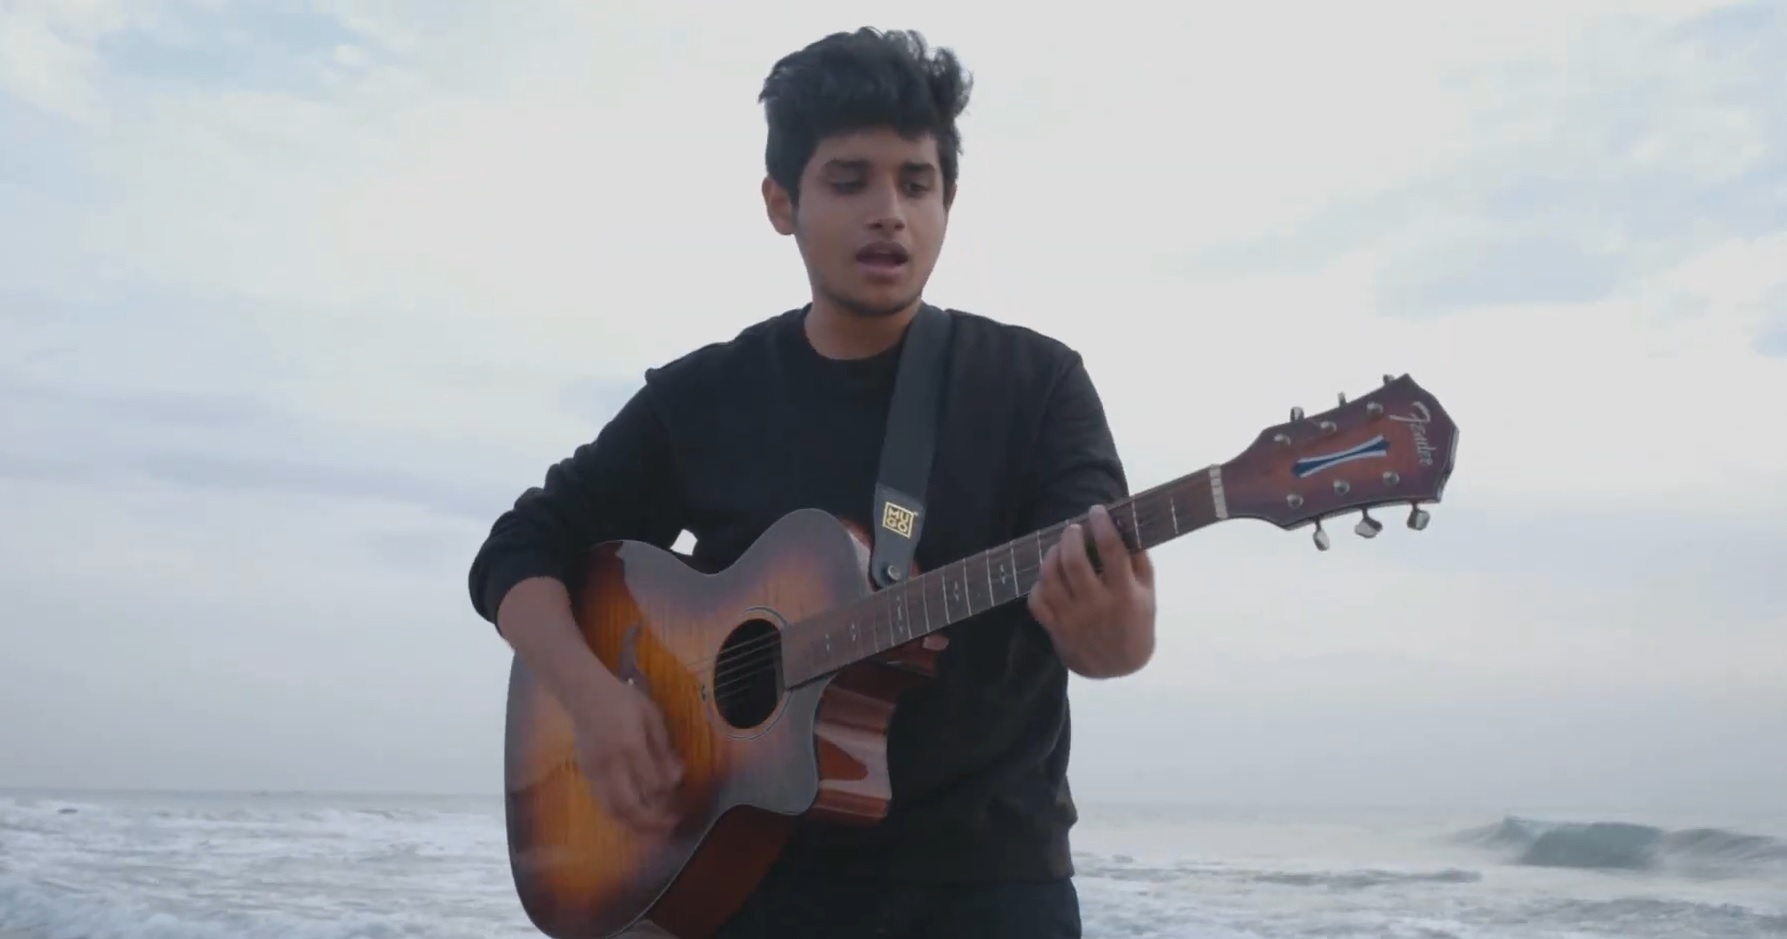 Premiere: Chennai Singer-Songwriter Sidharth Nair Asks for Promises on ‘Until You Found Me’